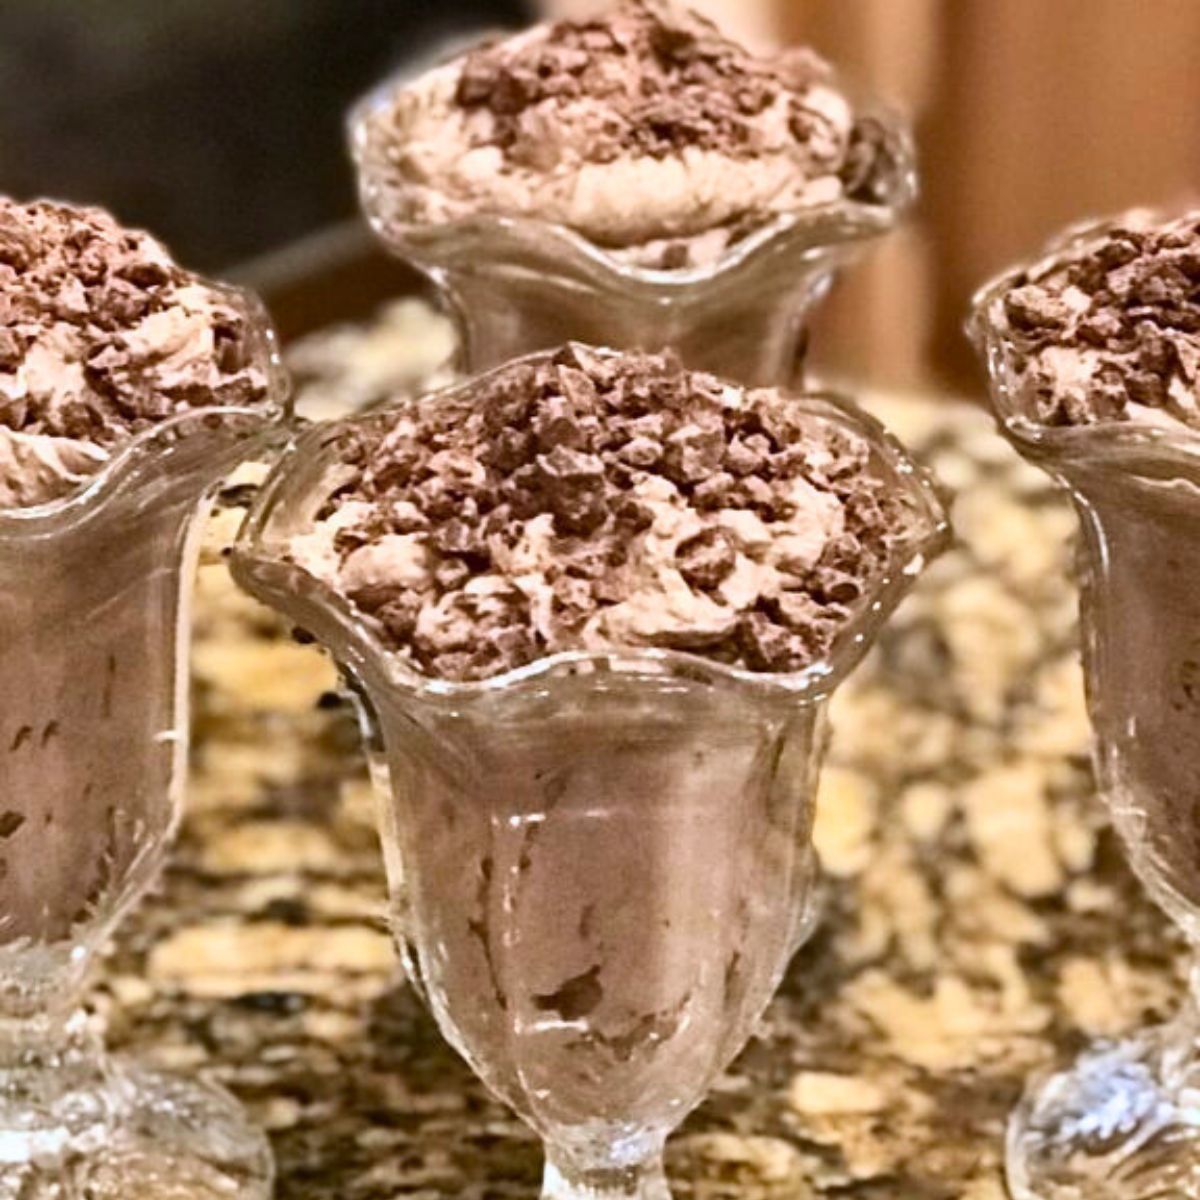 Easy, Low Carb Chocolate Mousse